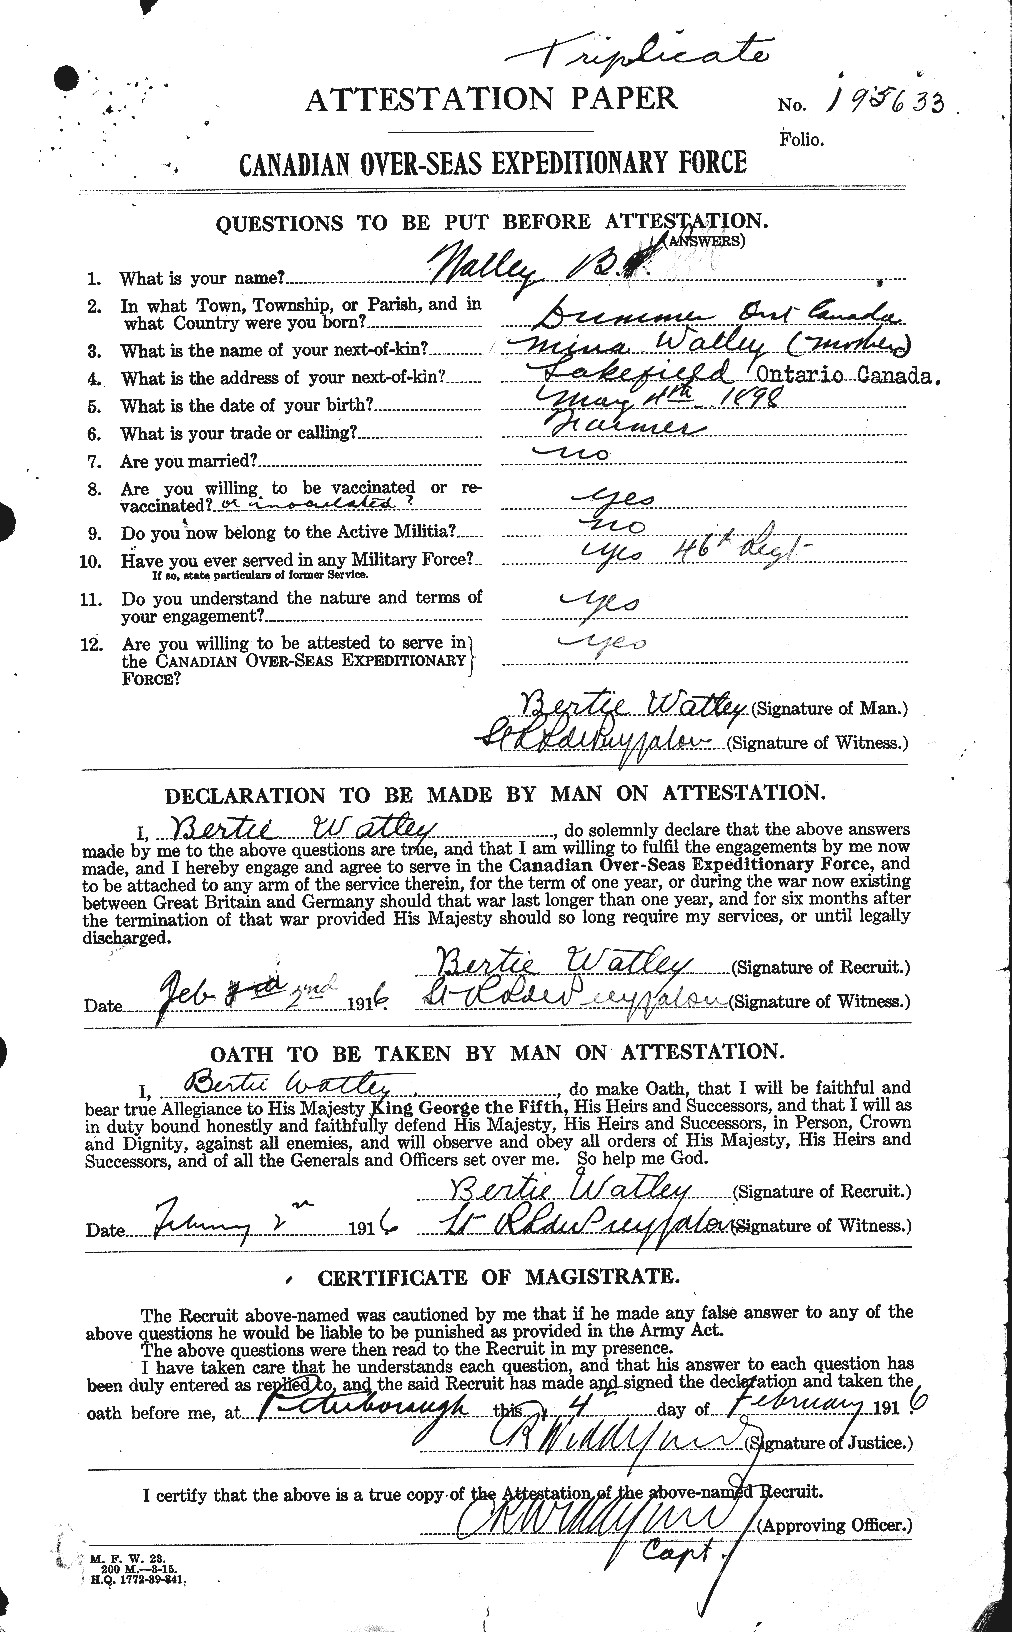 Personnel Records of the First World War - CEF 659338a